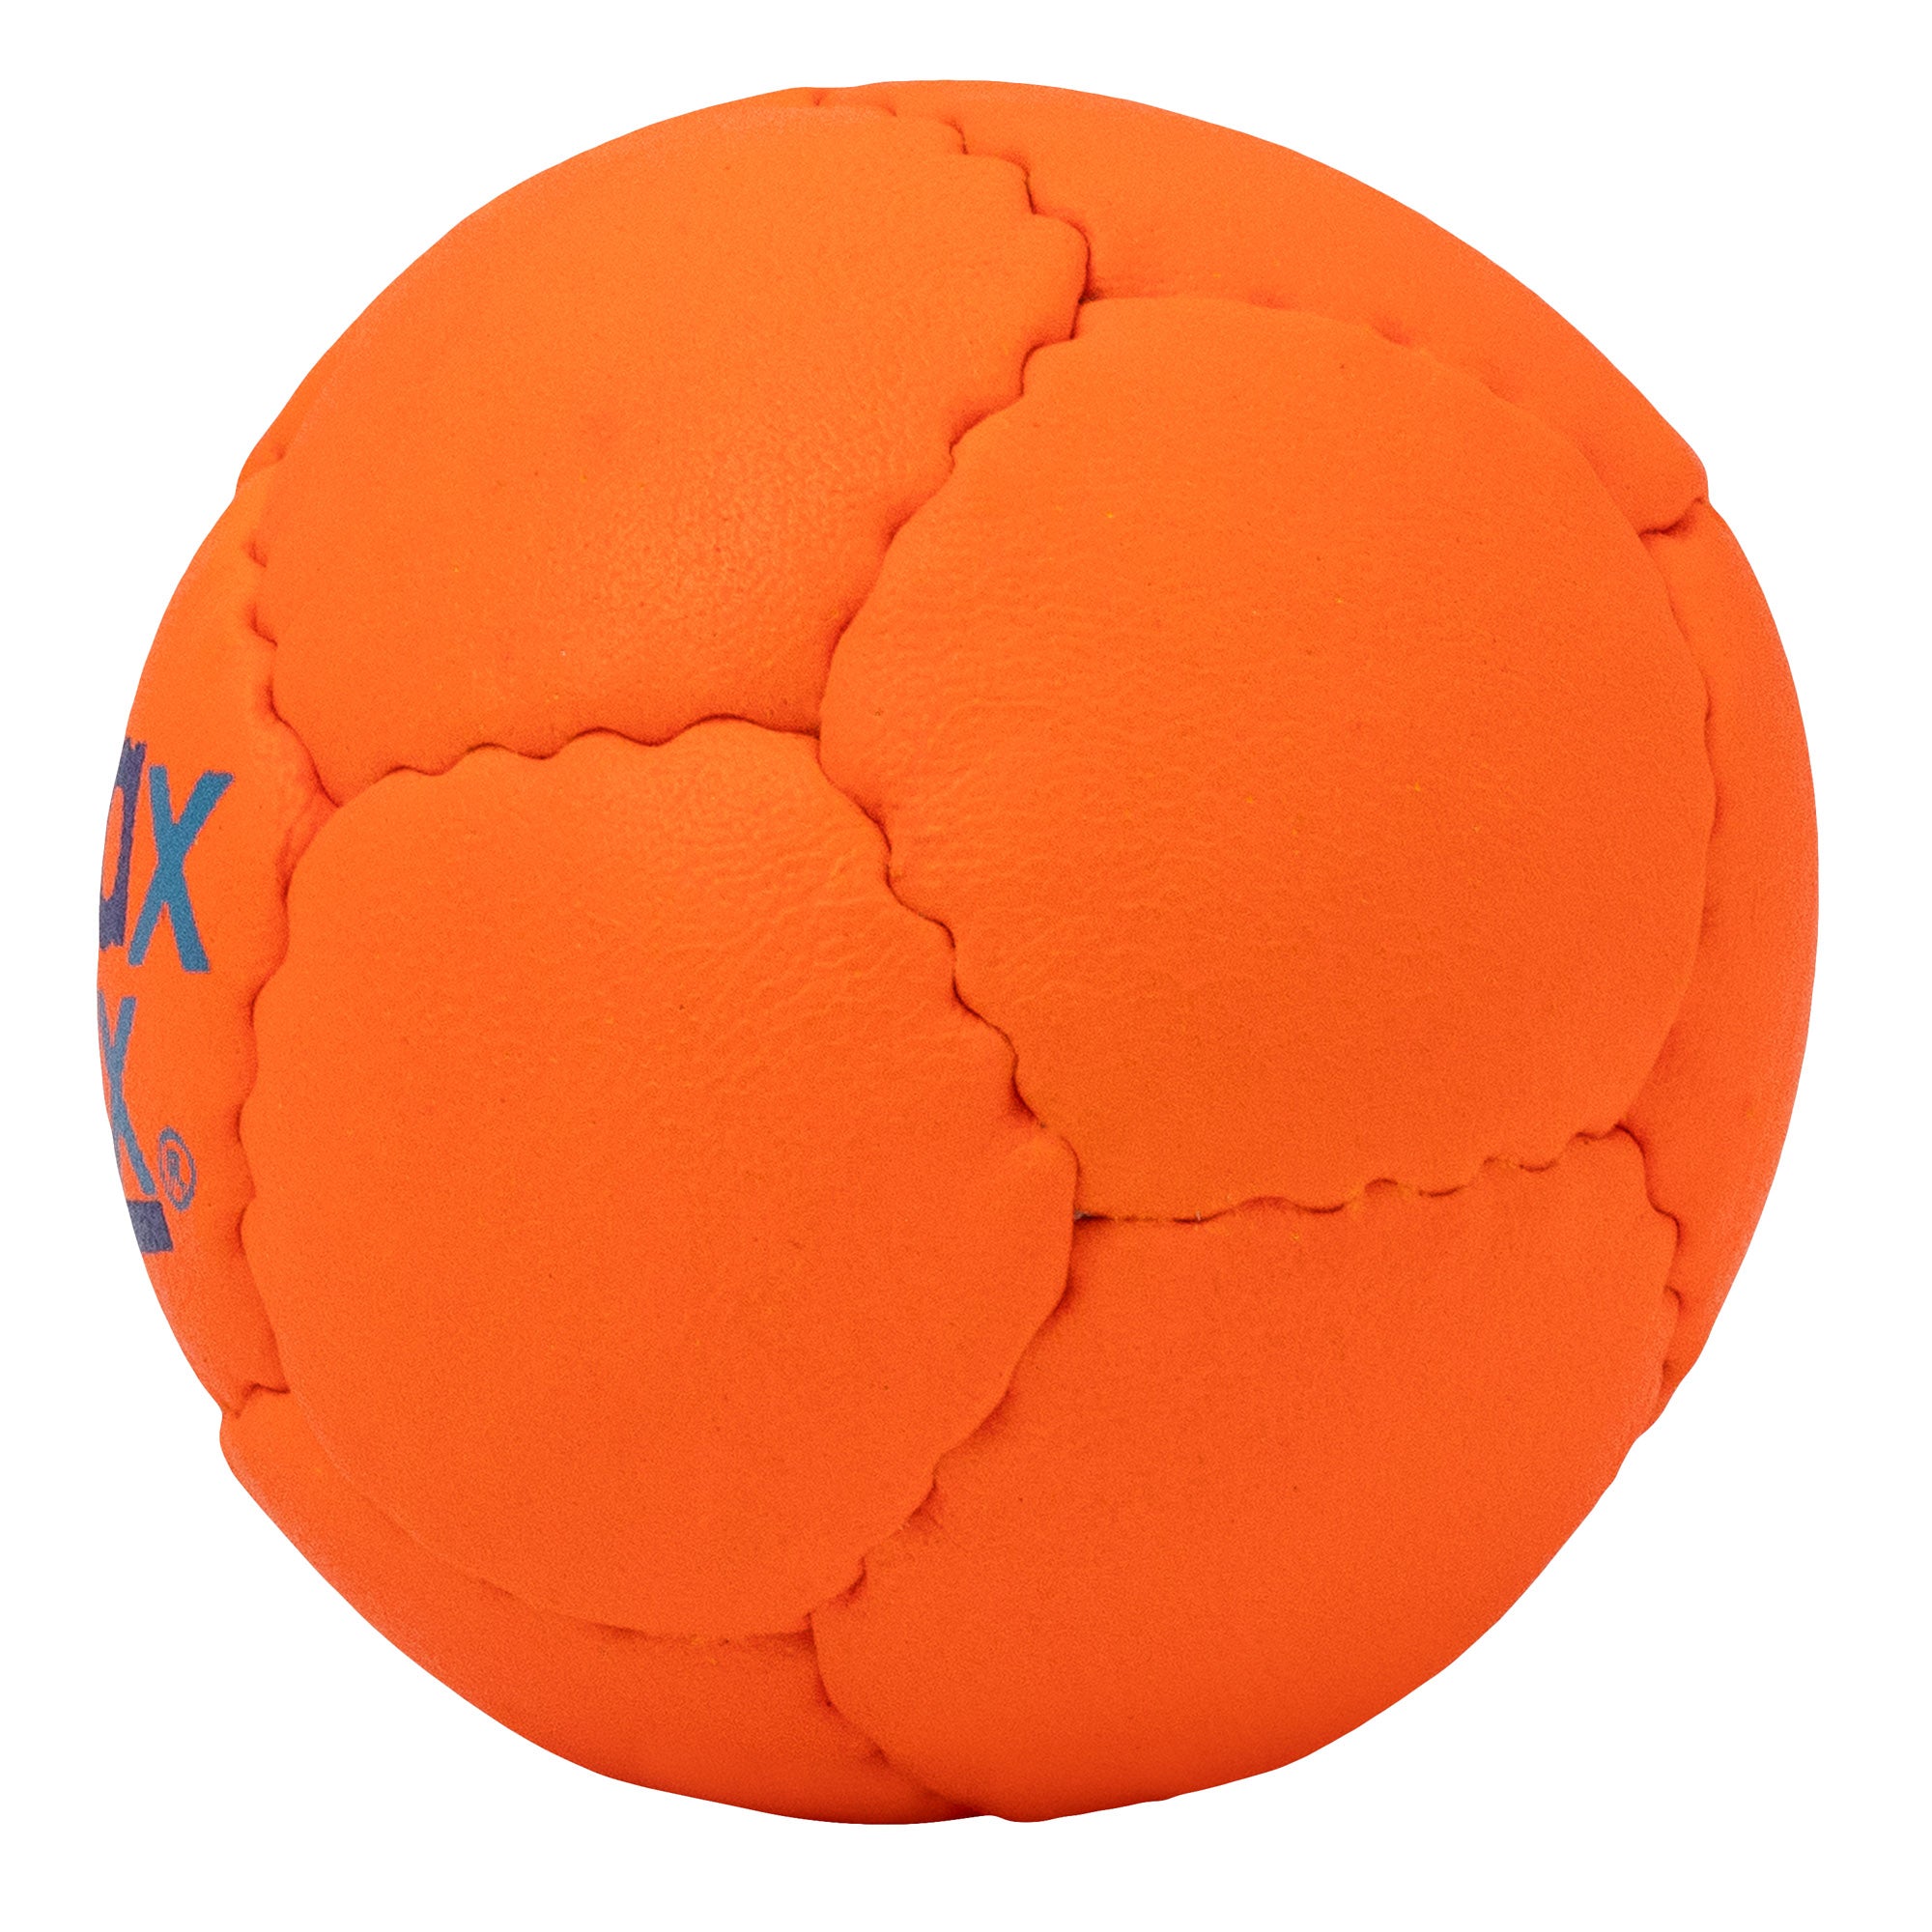 Orange Swax Lax lacrosse practice ball - side view